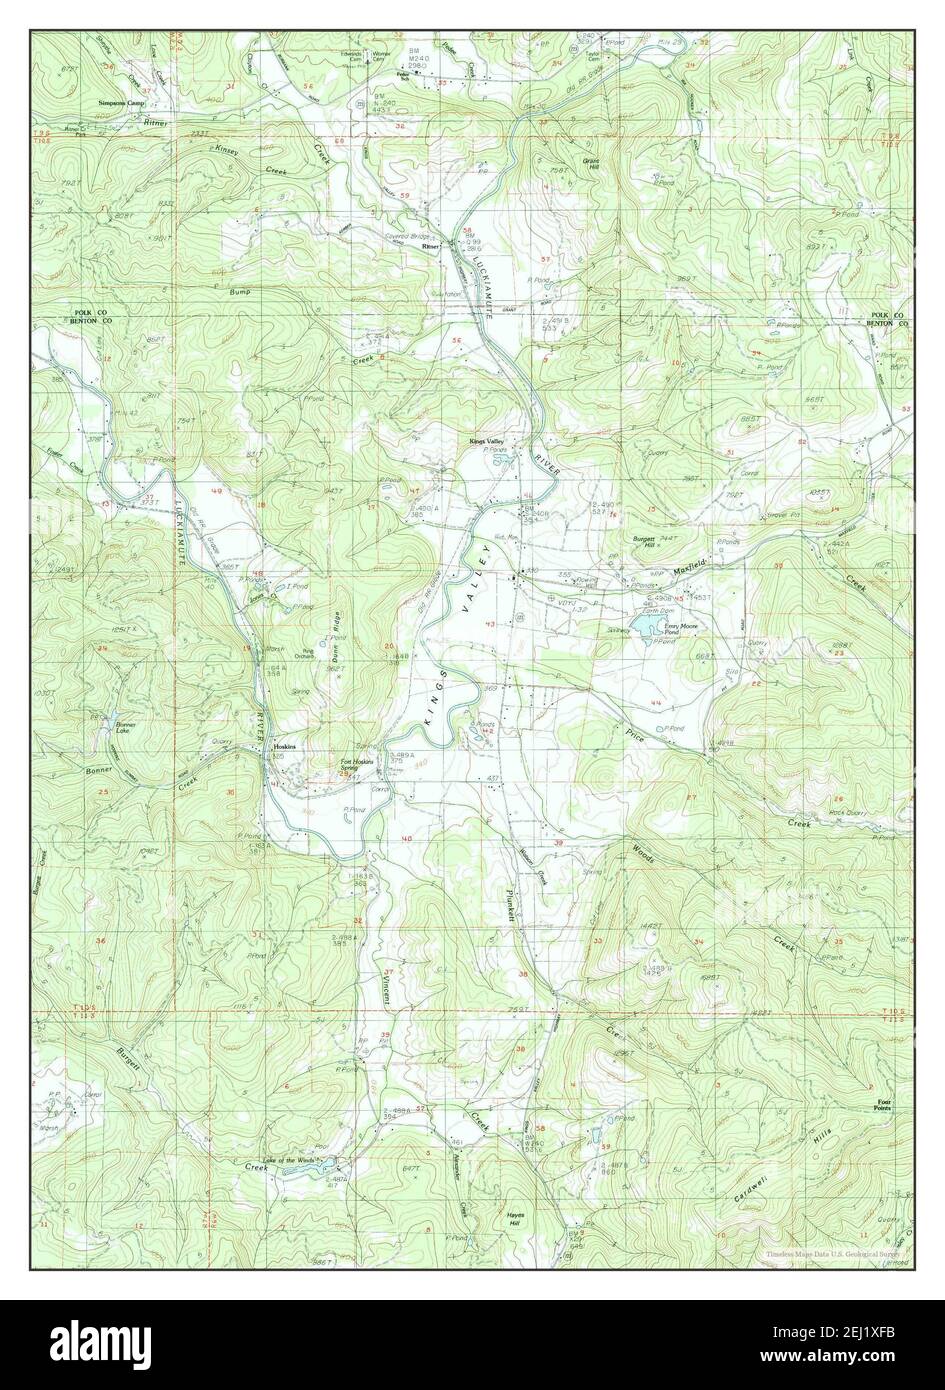 Kings Valley, Oregon, map 1984, 1:24000, United States of America by Timeless Maps, data U.S. Geological Survey Stock Photo